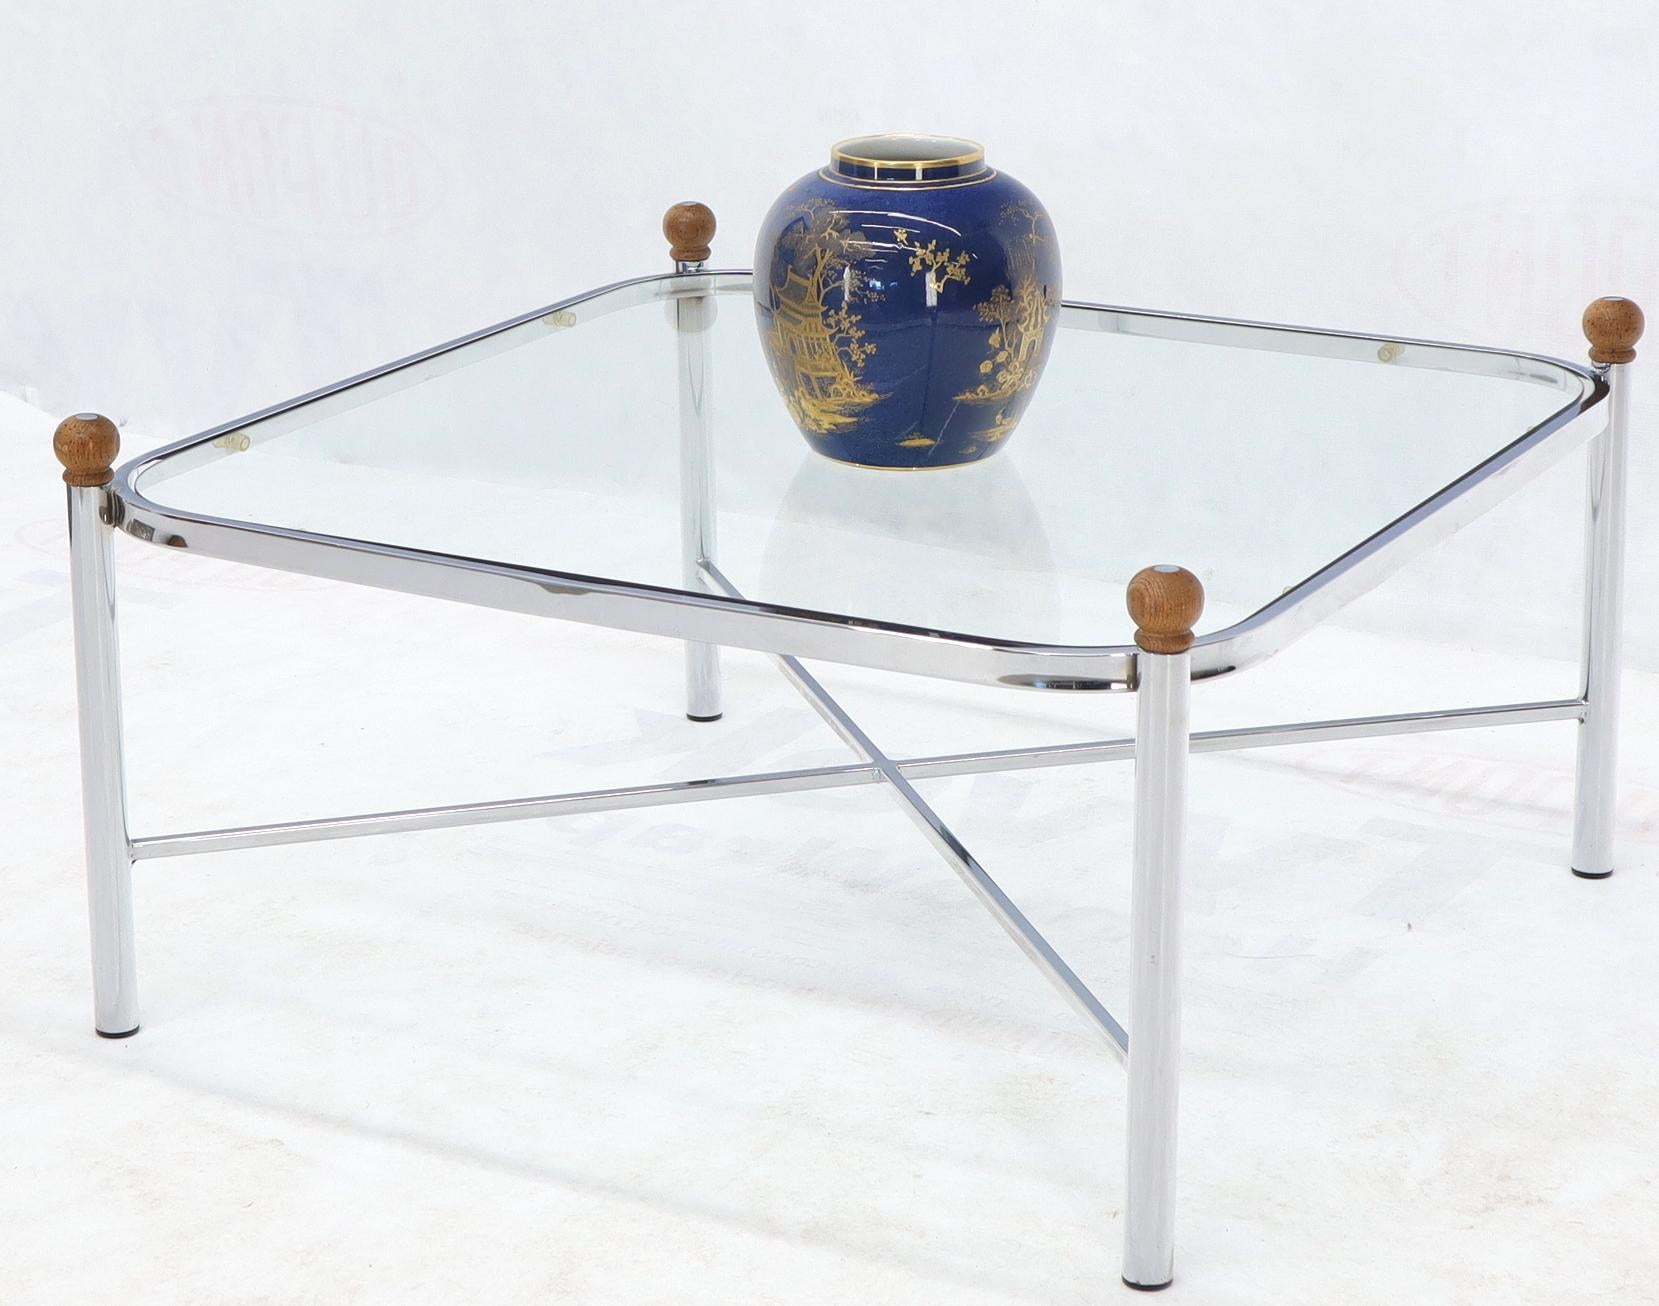 20th Century Square Rounded Corners Wood Finials X-Stretcher Base Chrome Coffee Table For Sale